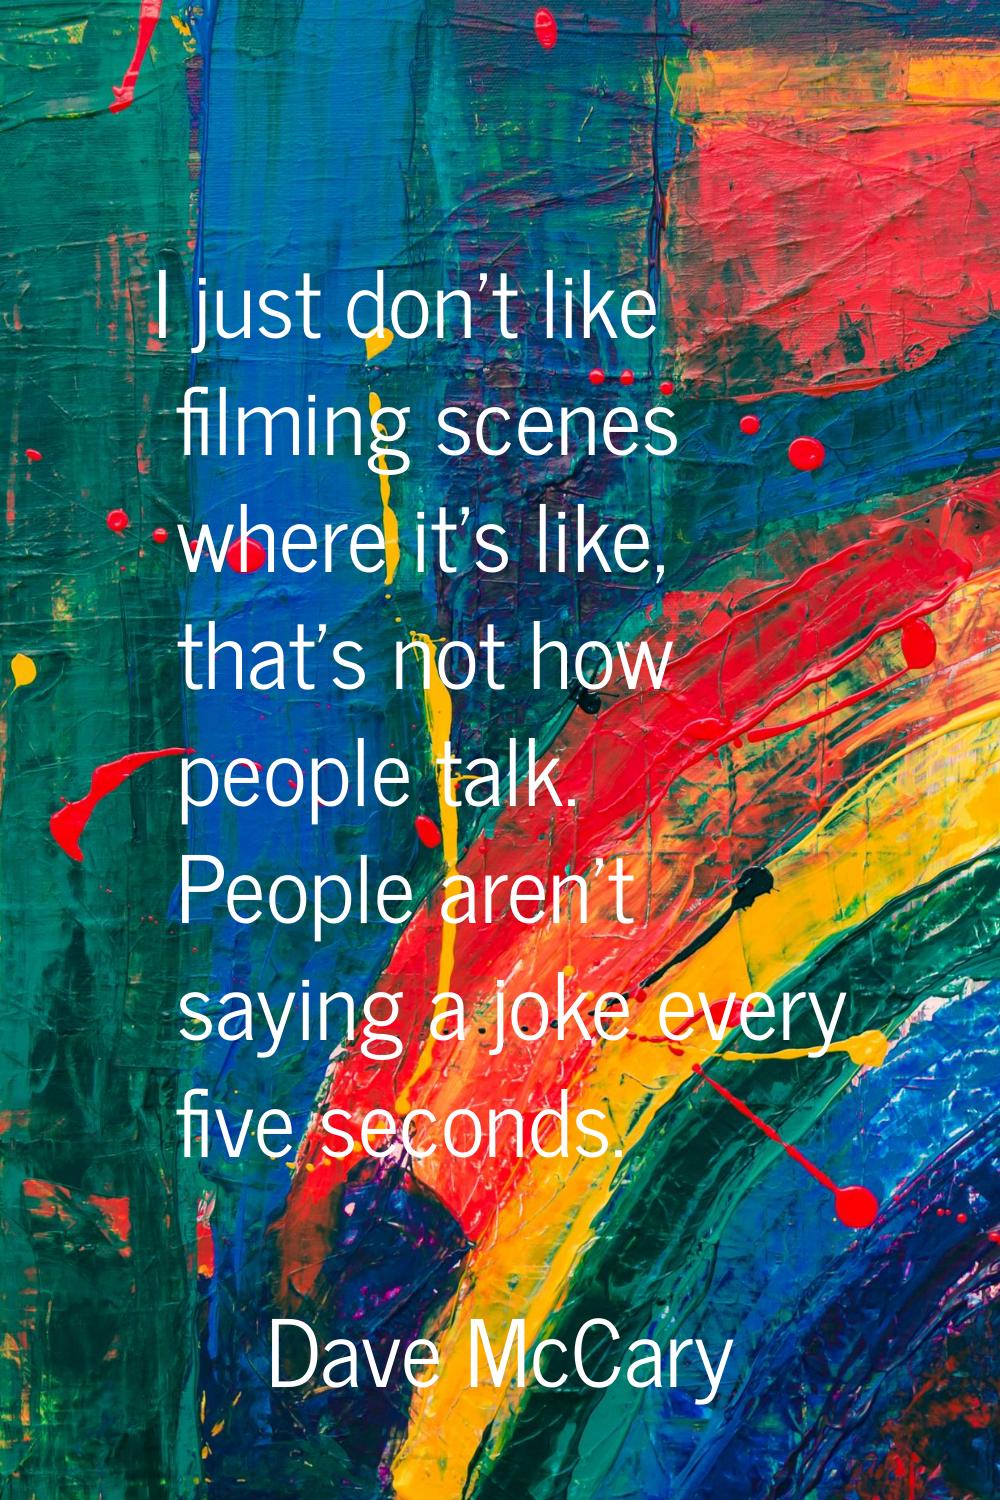 I just don't like filming scenes where it's like, that's not how people talk. People aren't saying 